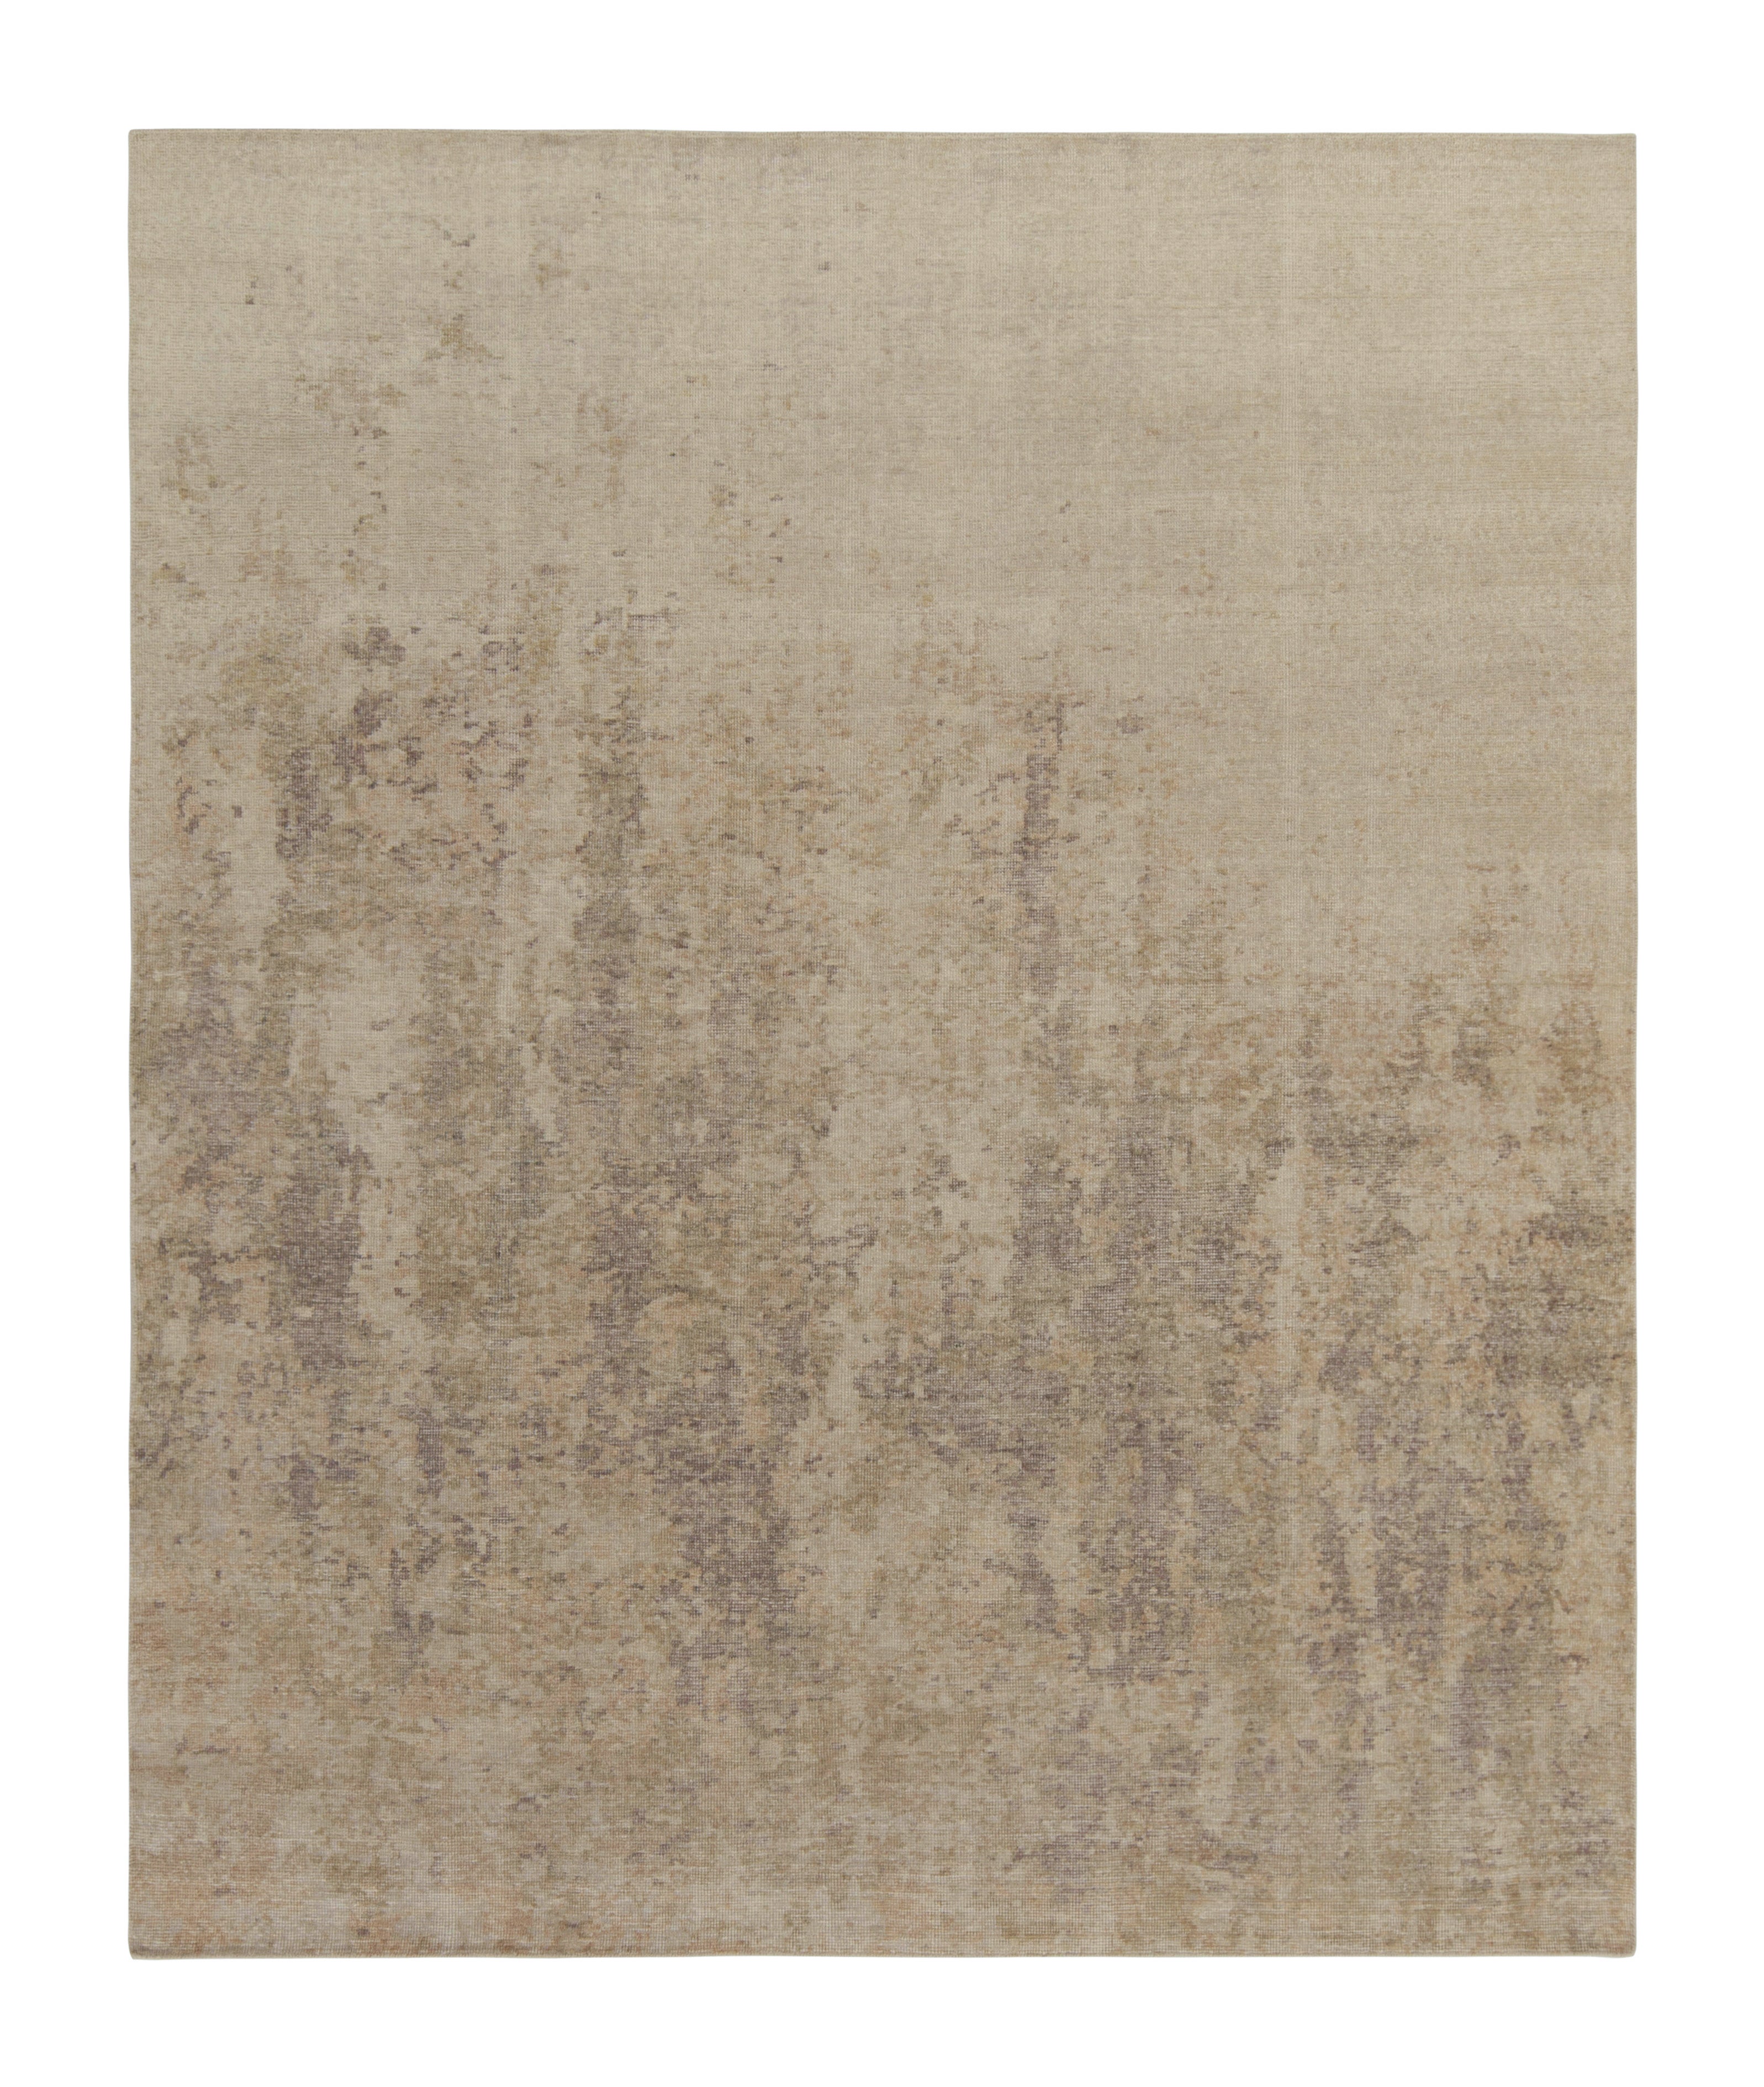 Rug & Kilim’s Abstract Rug in Beige-Brown Distressed Style For Sale